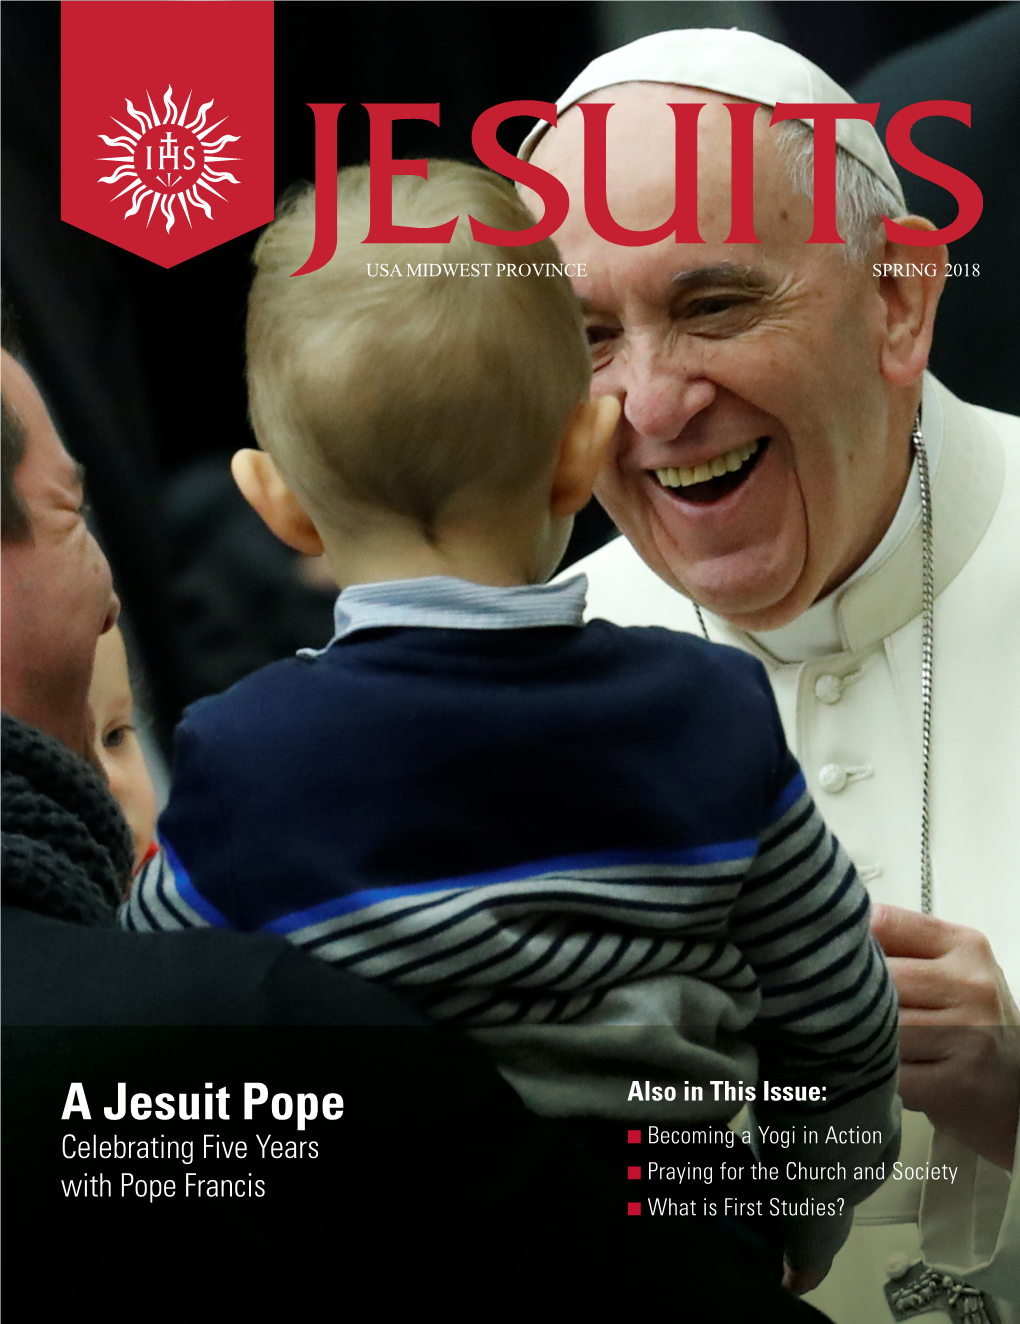 A Jesuit Pope Also in This Issue: Celebrating Five Years N Becoming a Yogi in Action N with Pope Francis Praying for the Church and Society N What Is First Studies?